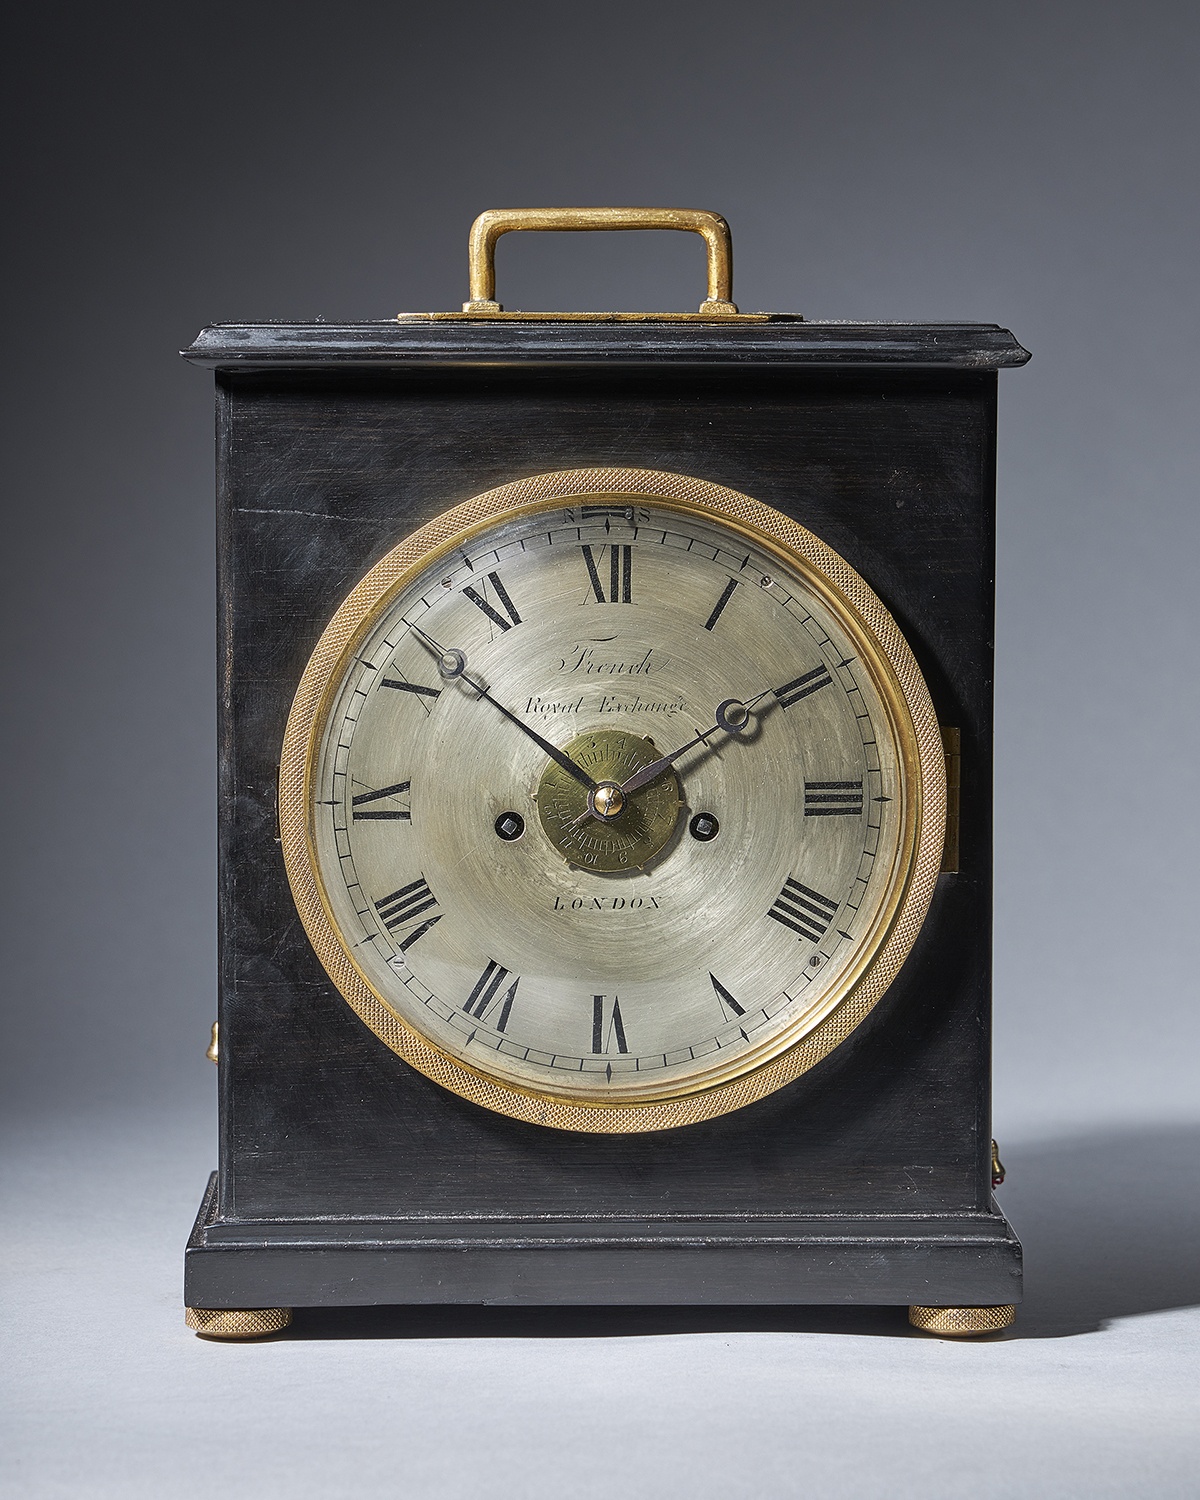 A unique early ninetieth-century travelling clock signed French Royal Exchange LONDON 5